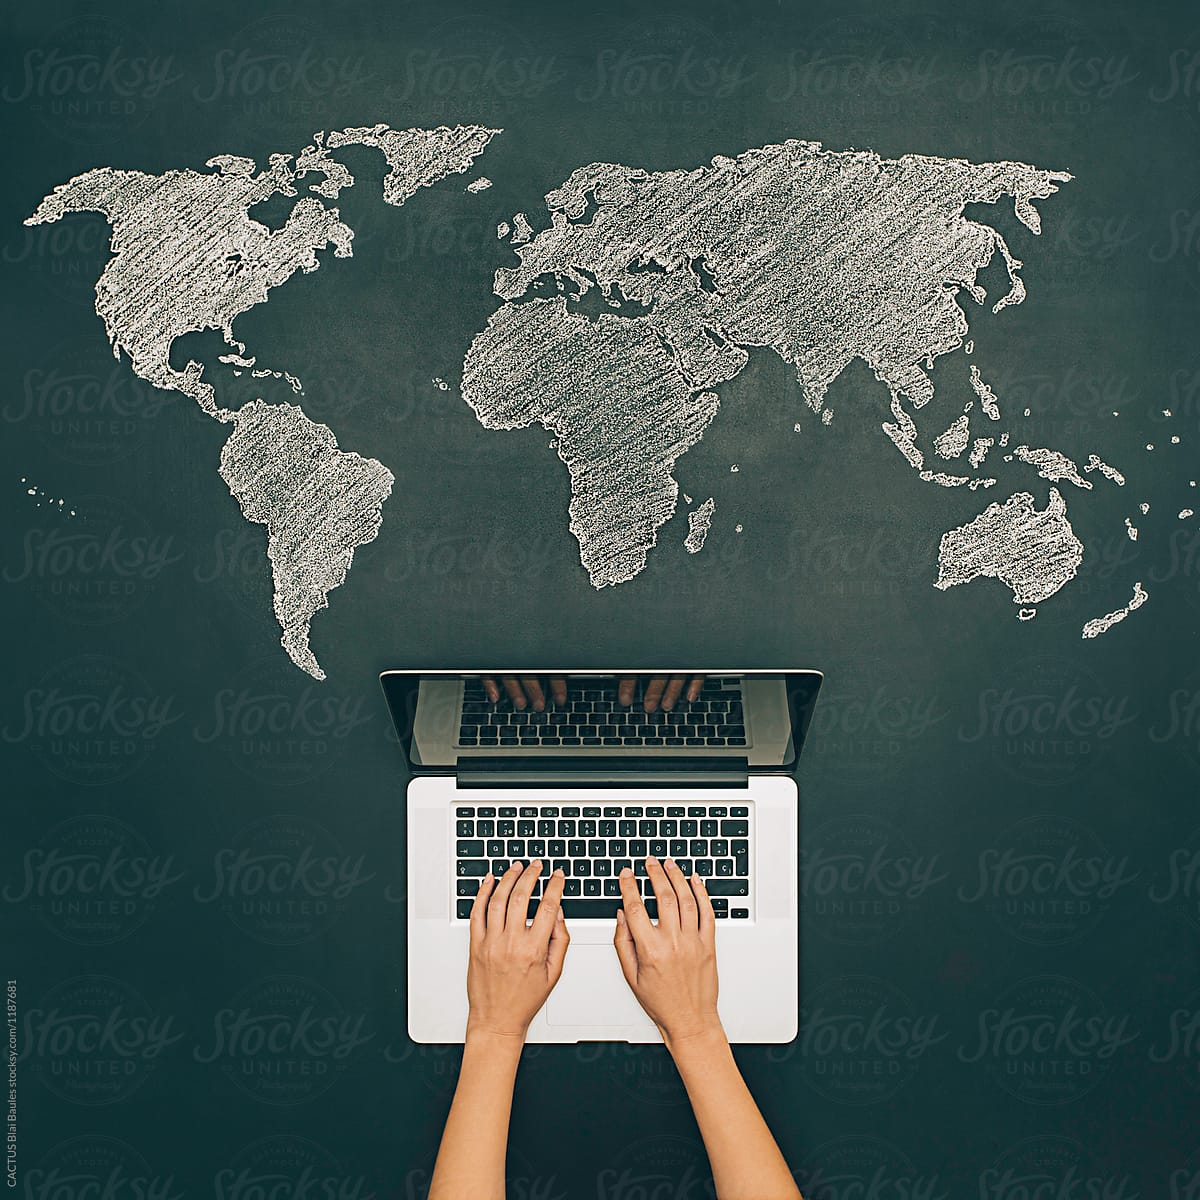 Internet search with notebook. World map on chalkboard.